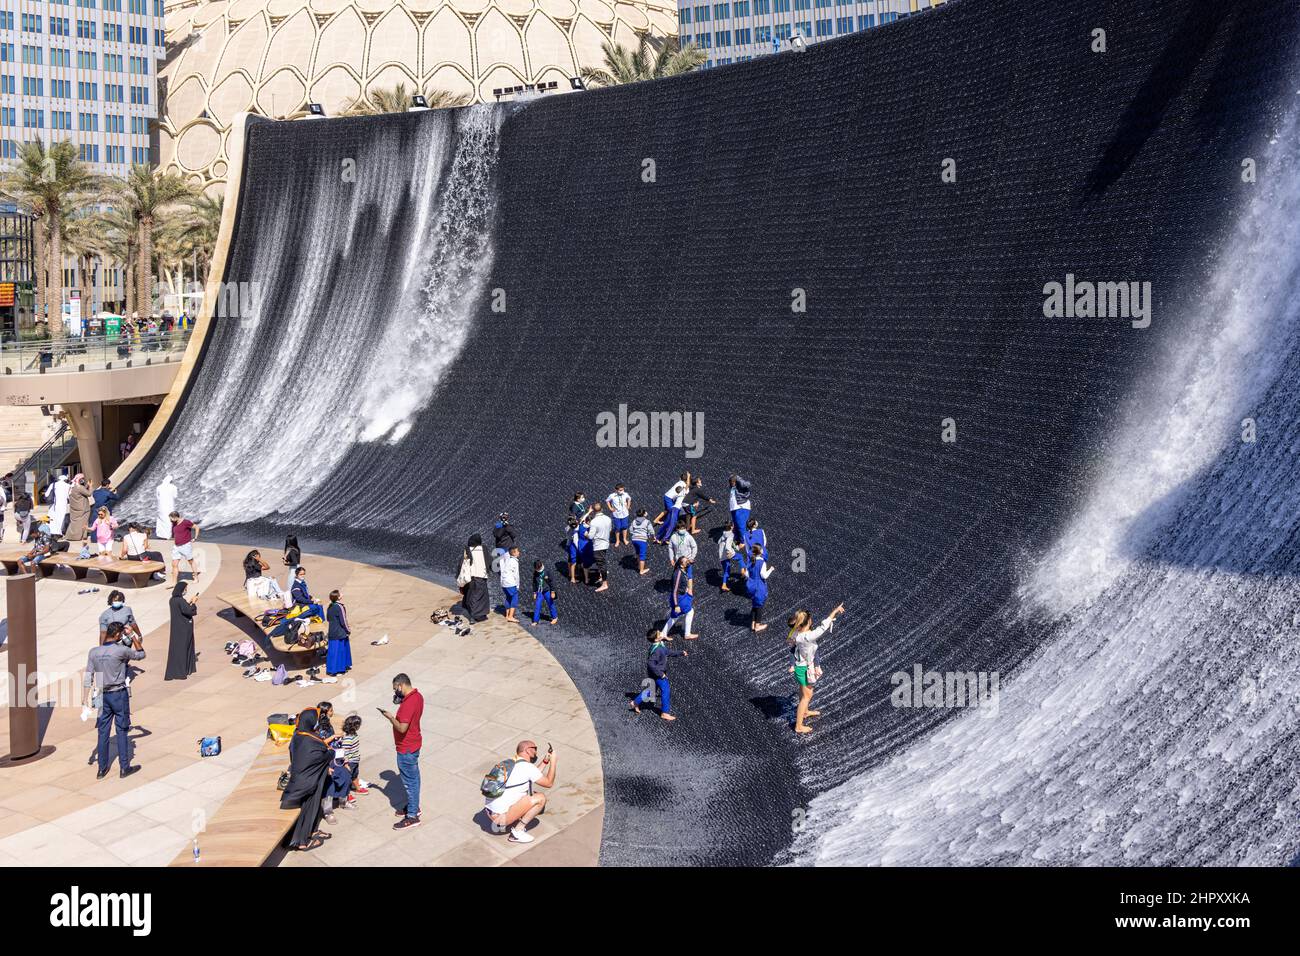 Visitors enjoying the surreal water feature in Jubilee Park at Dubai Expo 2020, United Arab Emirates. Stock Photo